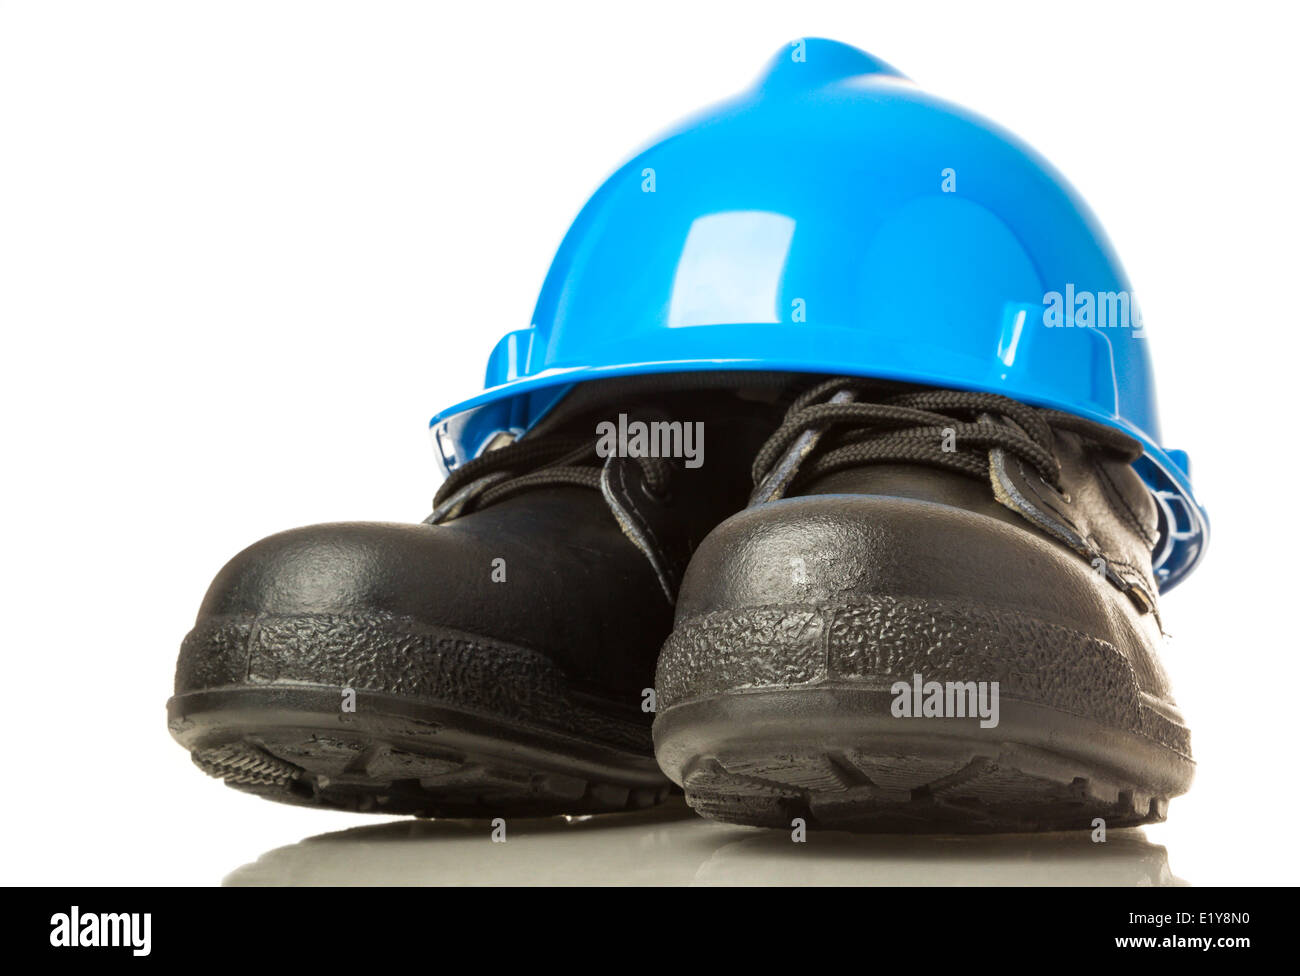 Construction hardhat and work boots on white background Stock Photo